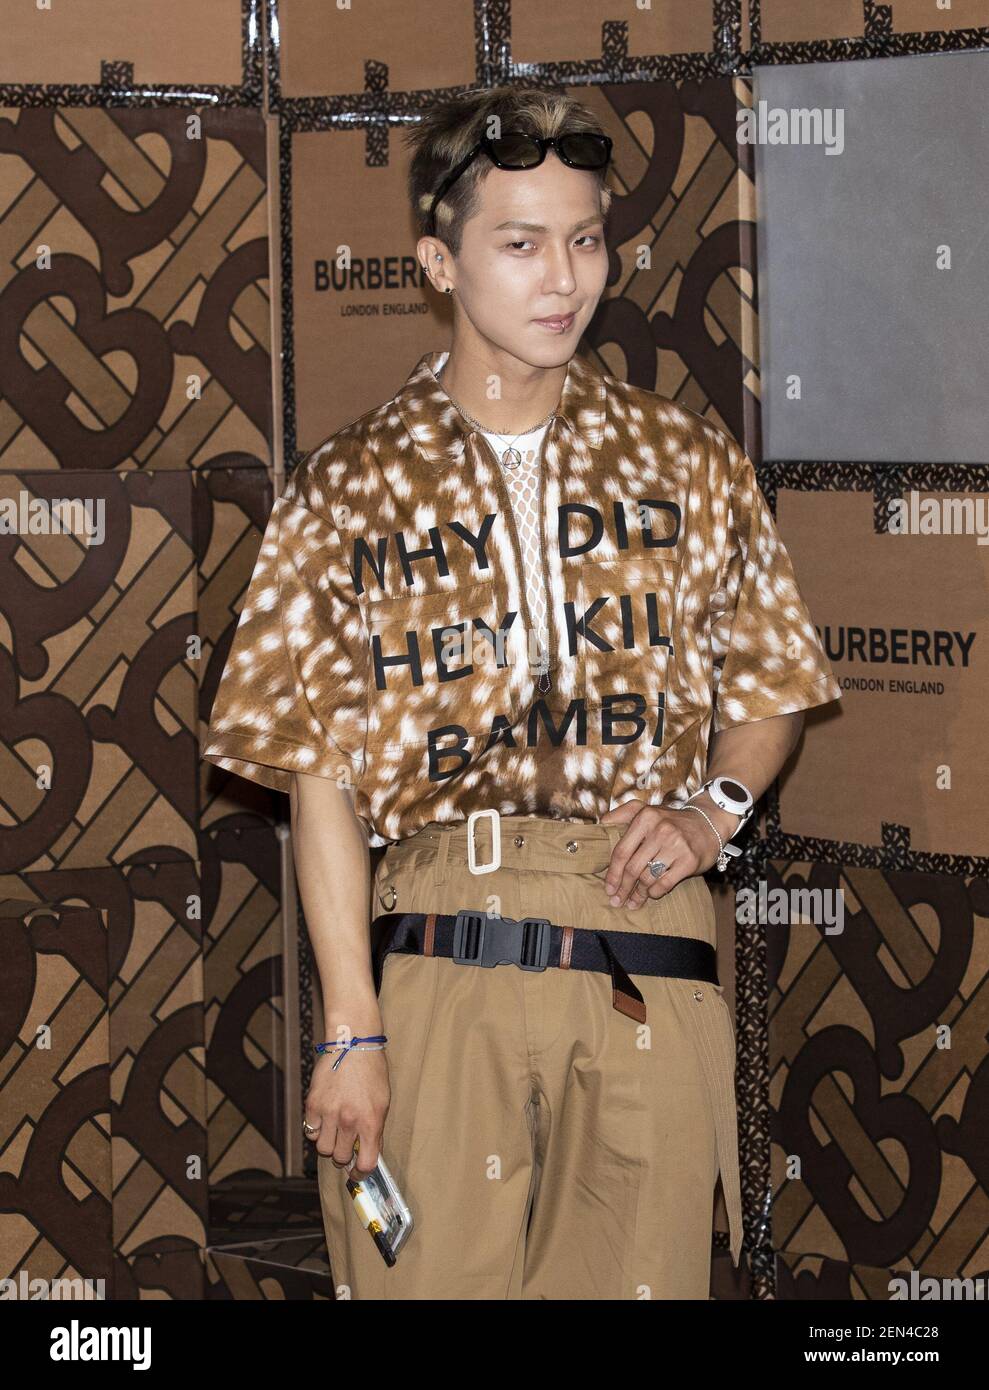 5 June 2019 - Seoul, South Korea : South Korean singer Son Min-ho, member  of K-Pop boy band Winner, attends a photo call for the Burberry Monogram  Collection Launching in Seoul, South